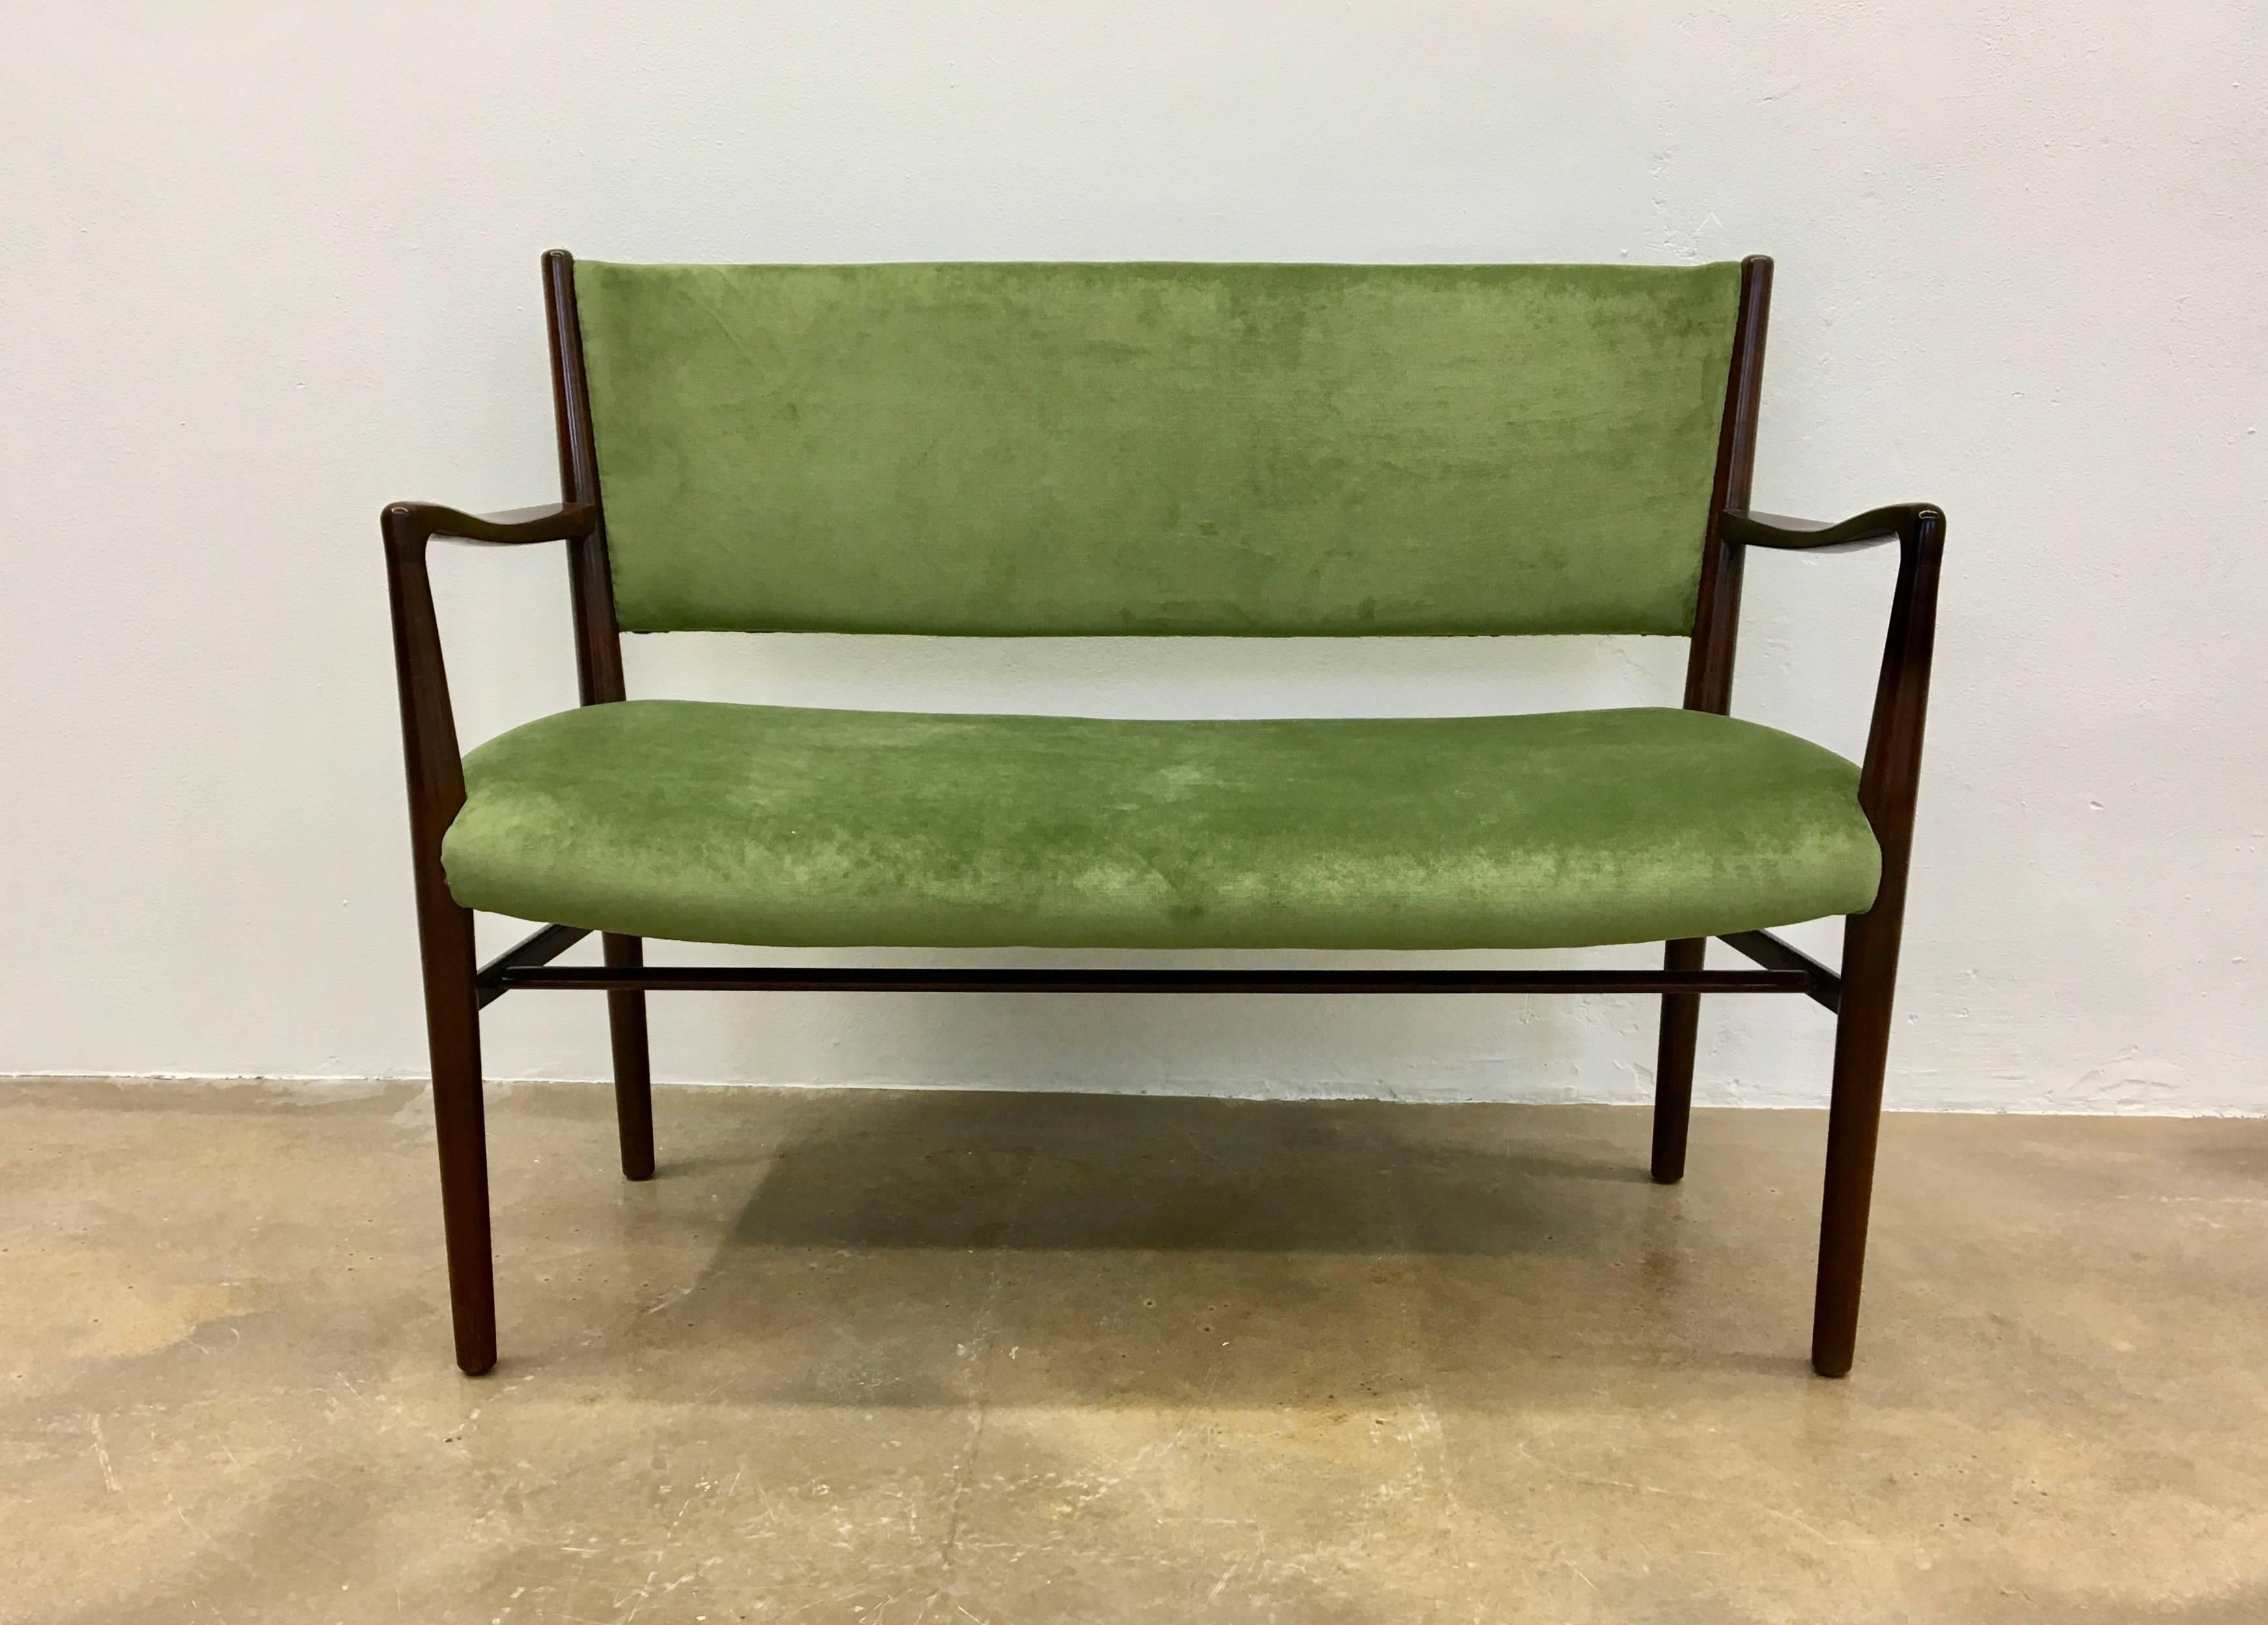 This two-seat bench was produced in Denmark, circa 1950s. It is made from mahogany and is upholstered with green velvet.